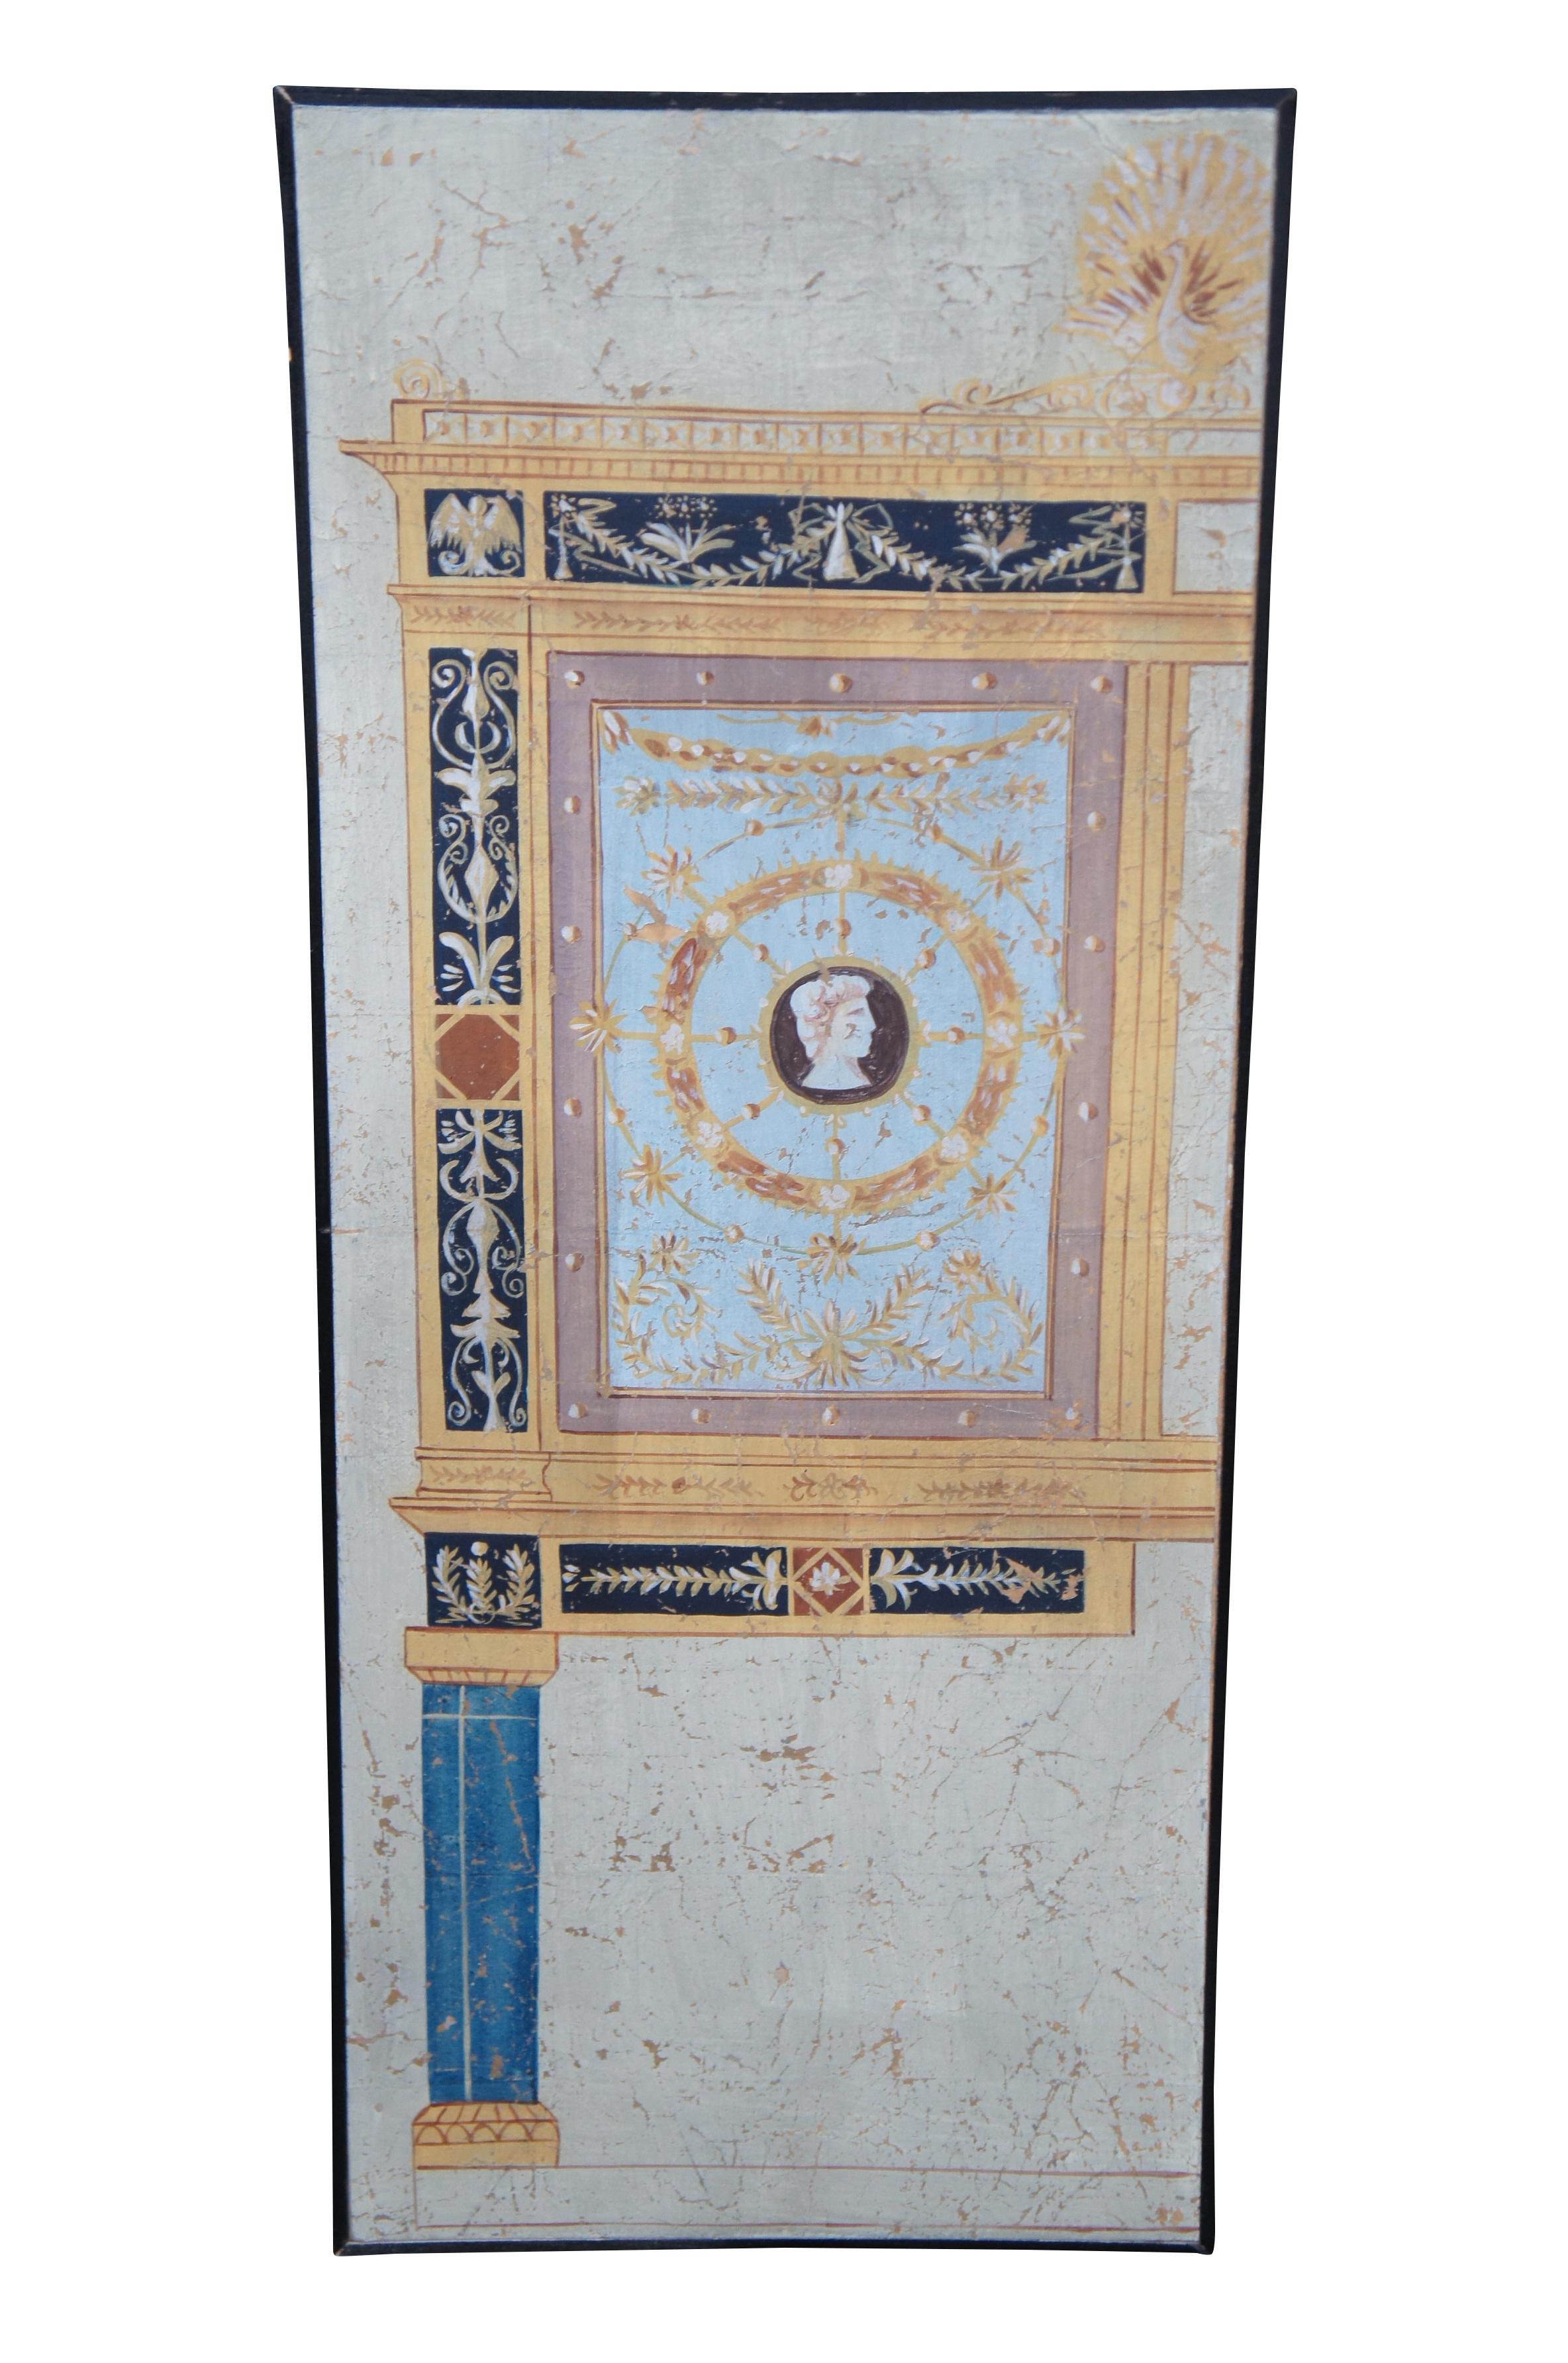 2 Wall hanging Neoclassical Archictural panels, circa last quarter 20th century.  Depicting the interior walls of a temple or residence of royalty. Each is painted on board with a metal clip along the back for hanging  display 

Dimensions:
18